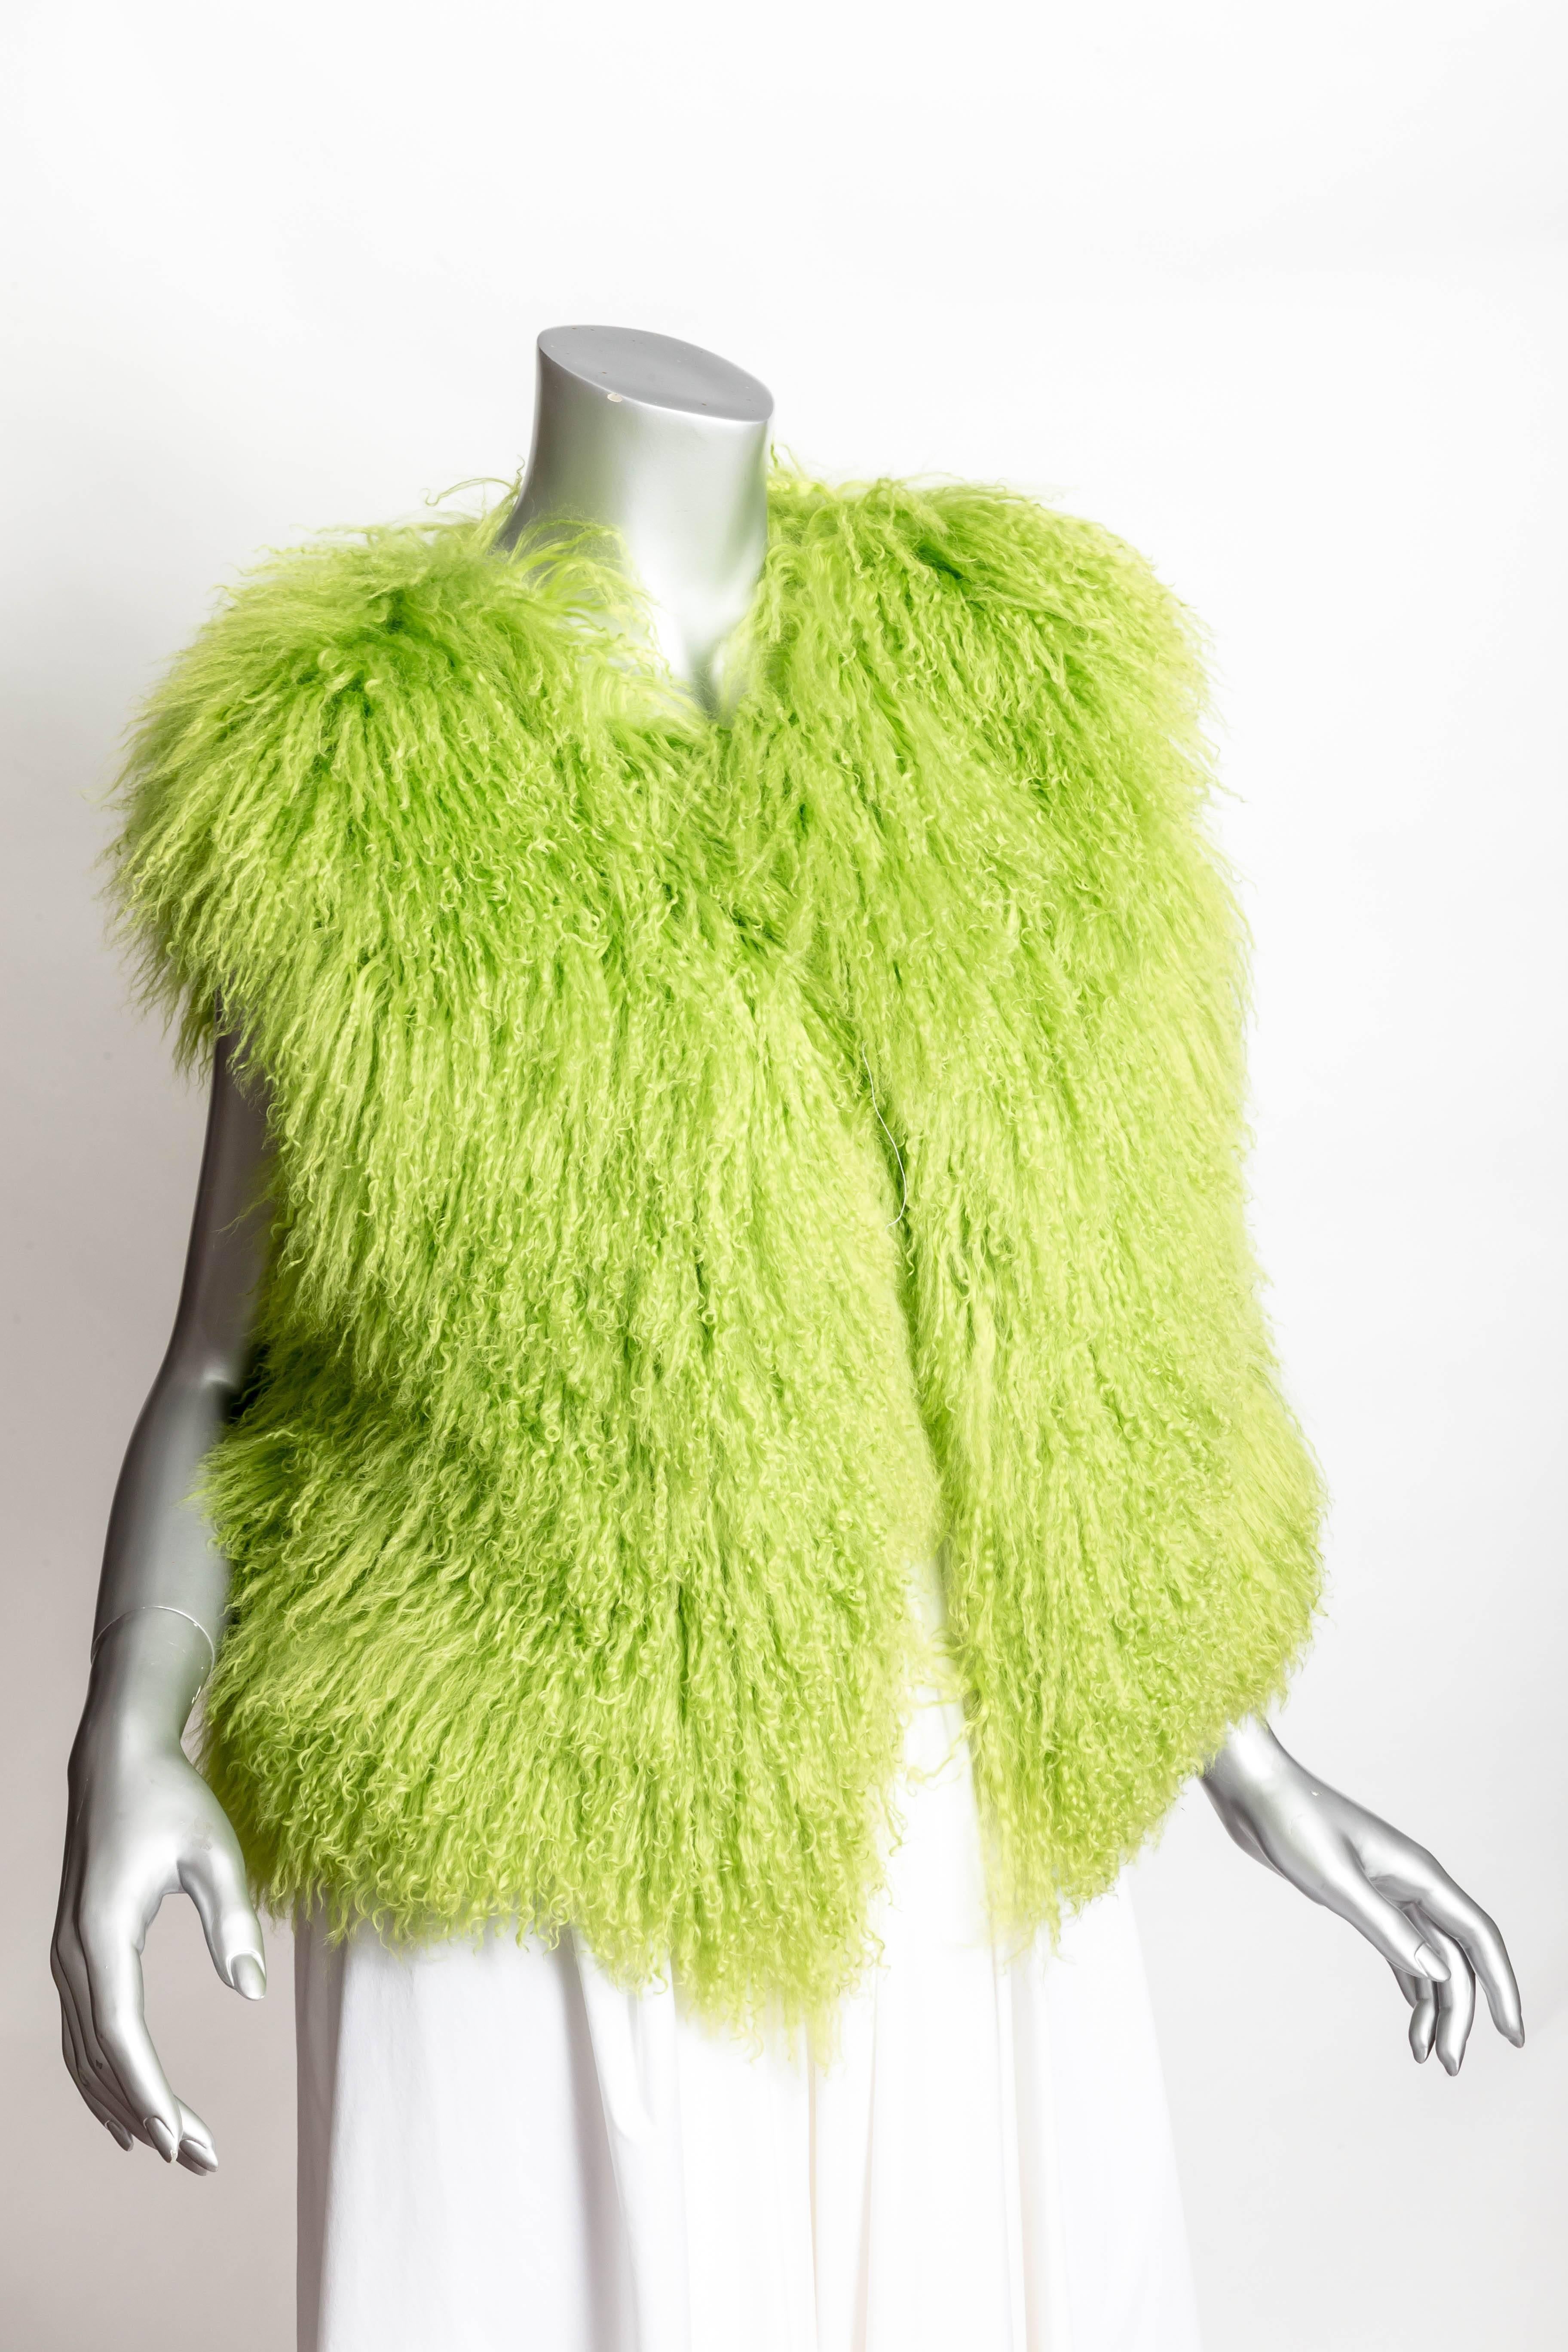 Quirky Lisa Perry Mongolian Lamb vest in neon green.
One Size Fits All
